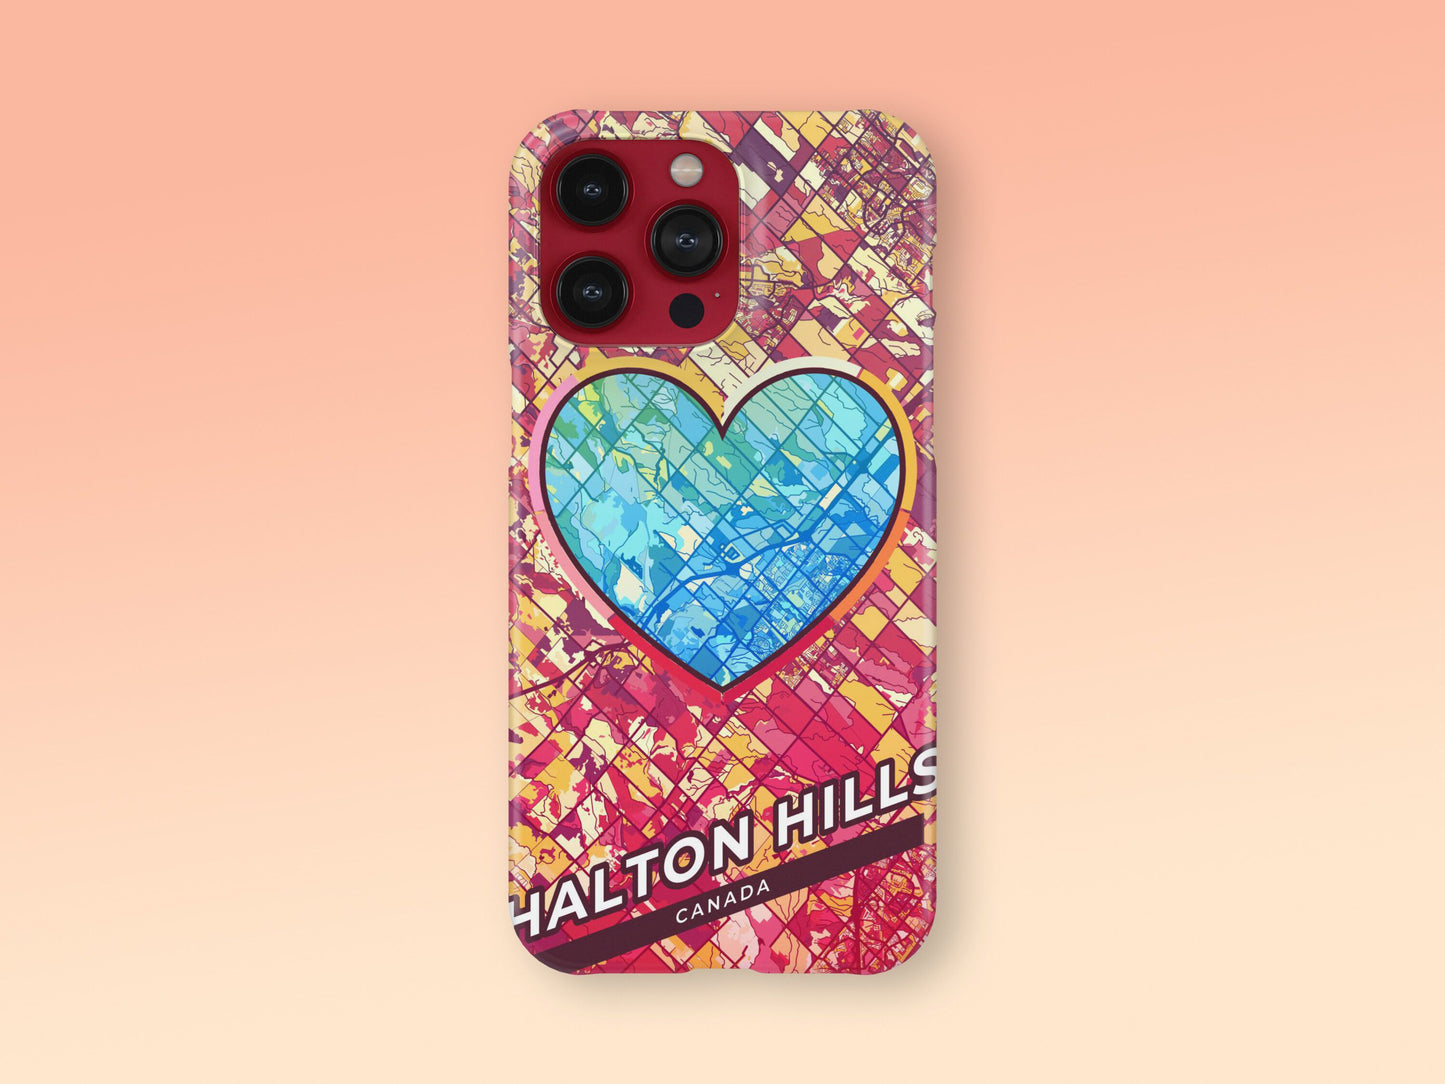 Halton Hills Canada slim phone case with colorful icon. Birthday, wedding or housewarming gift. Couple match cases. 2